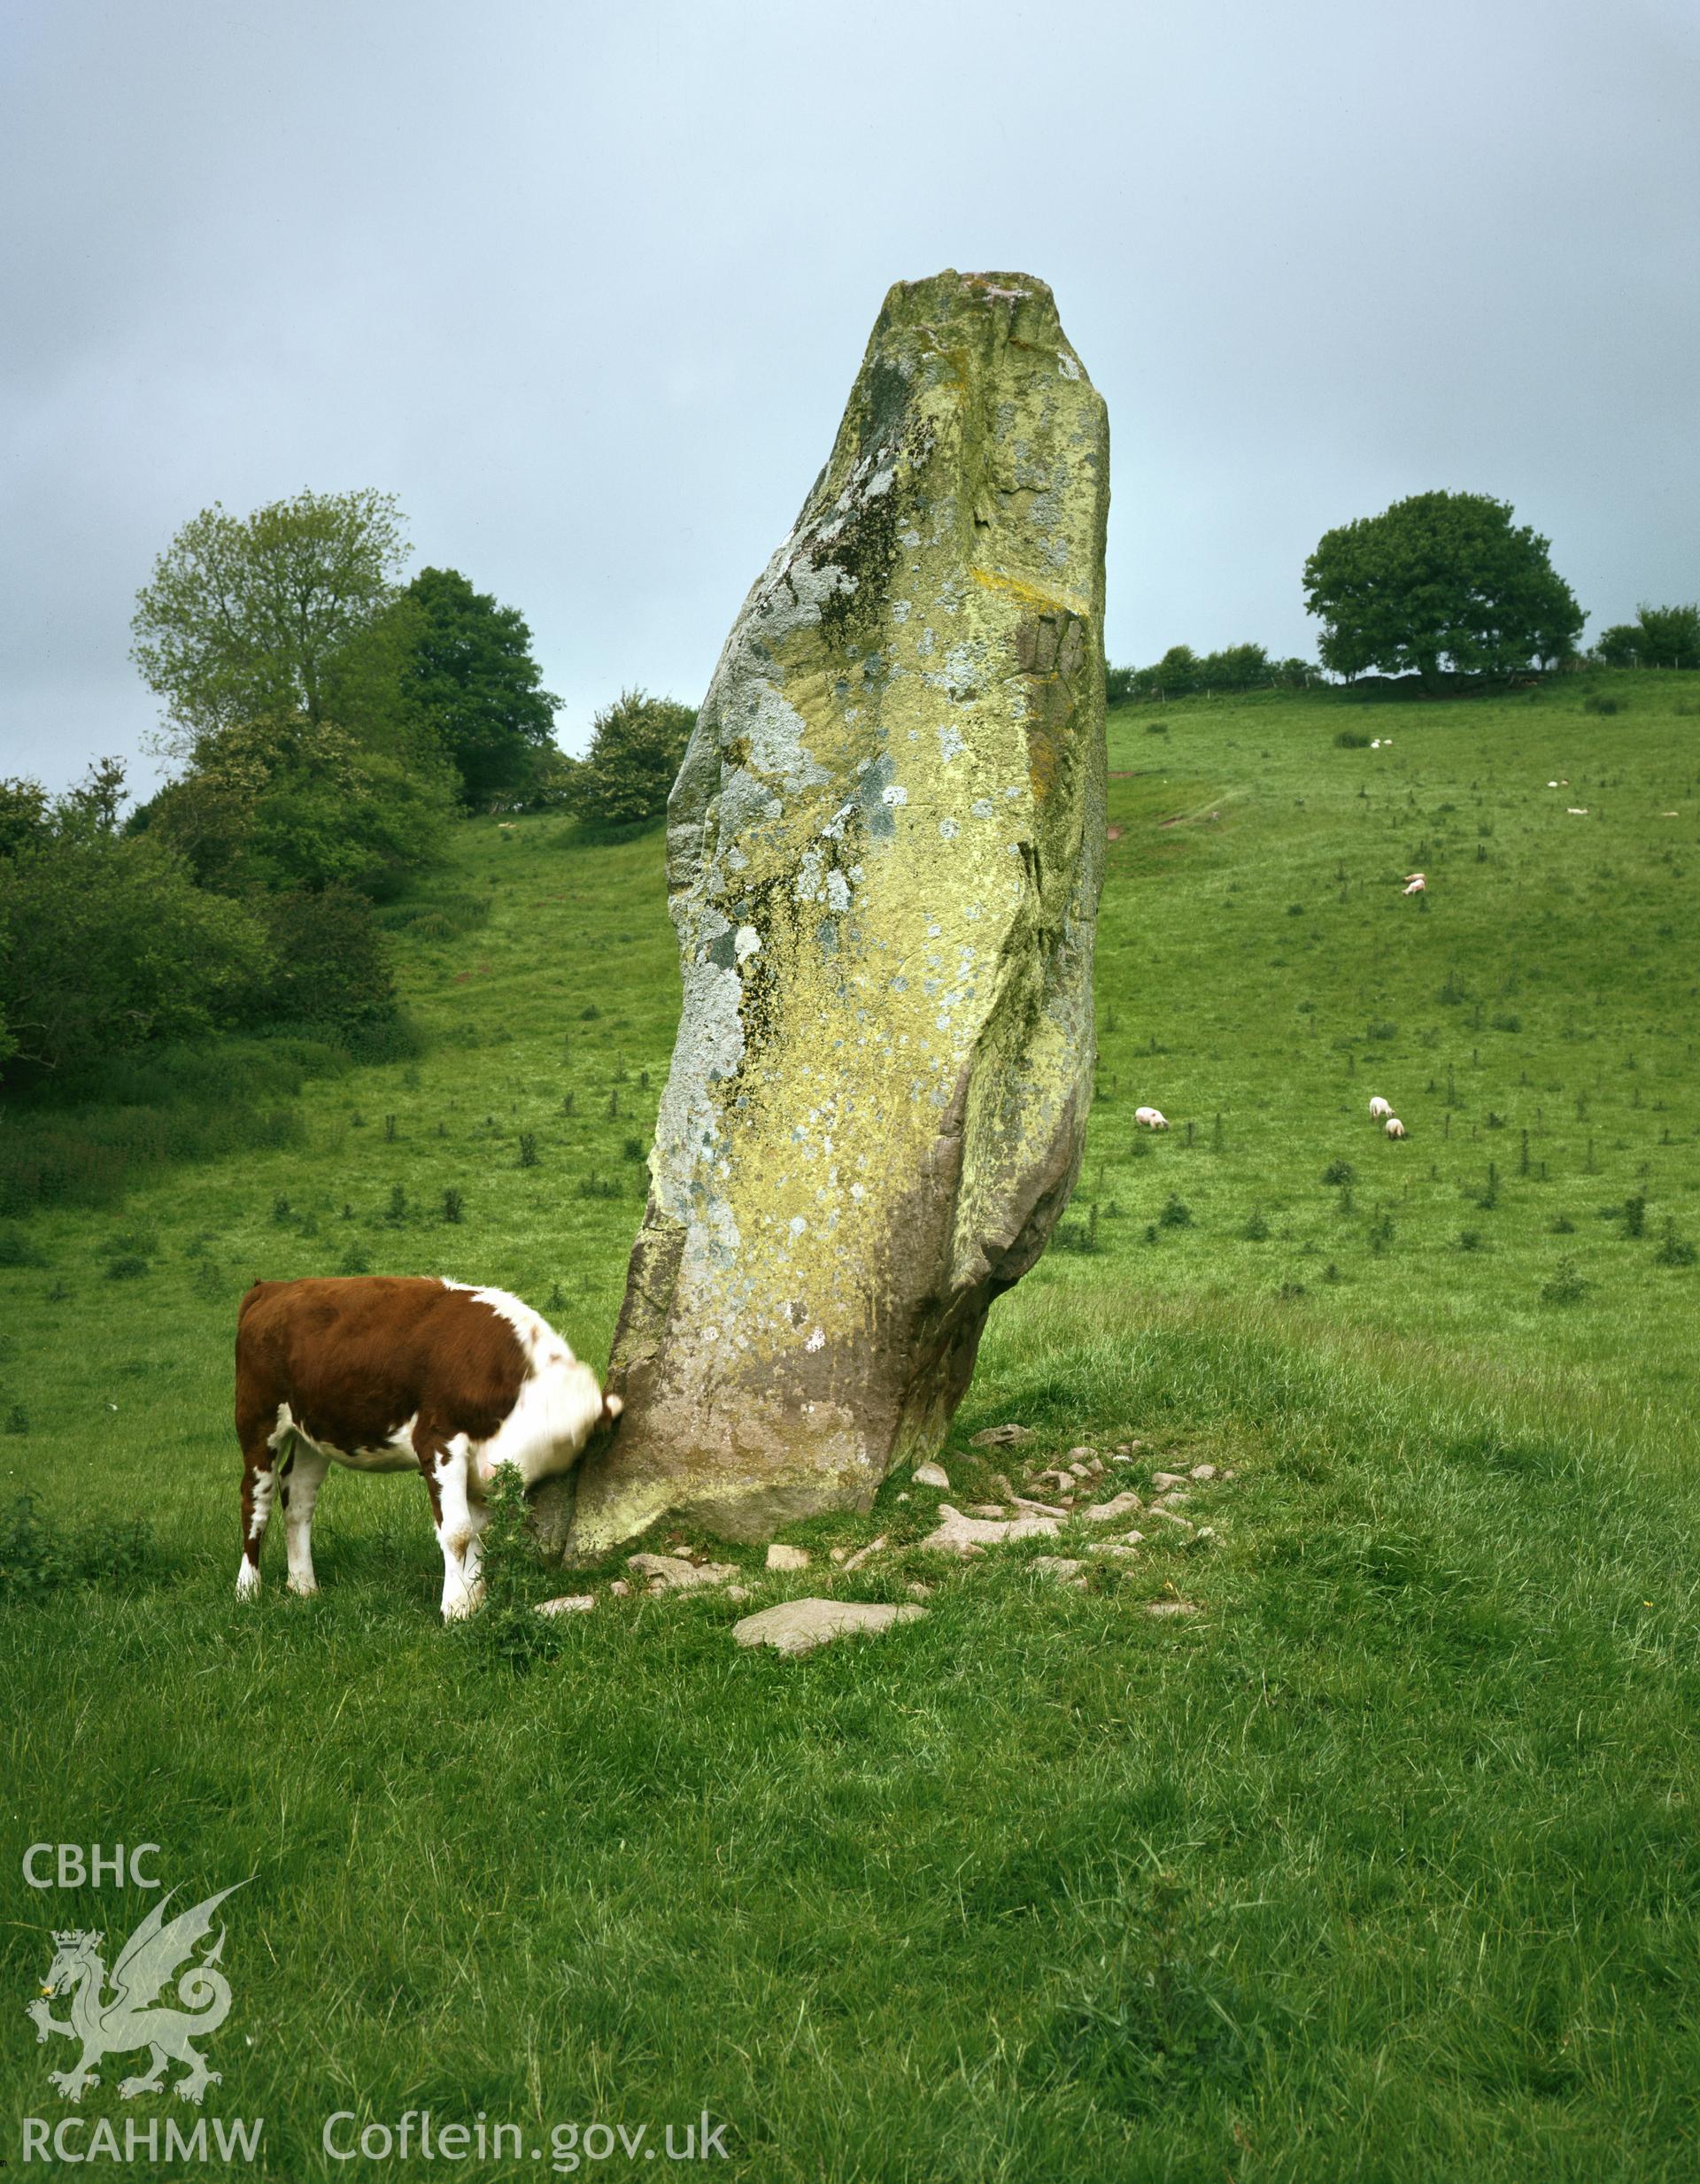 RCAHMW colour transparency showing Battle Standing Stone, taken by RCAHMW 1981